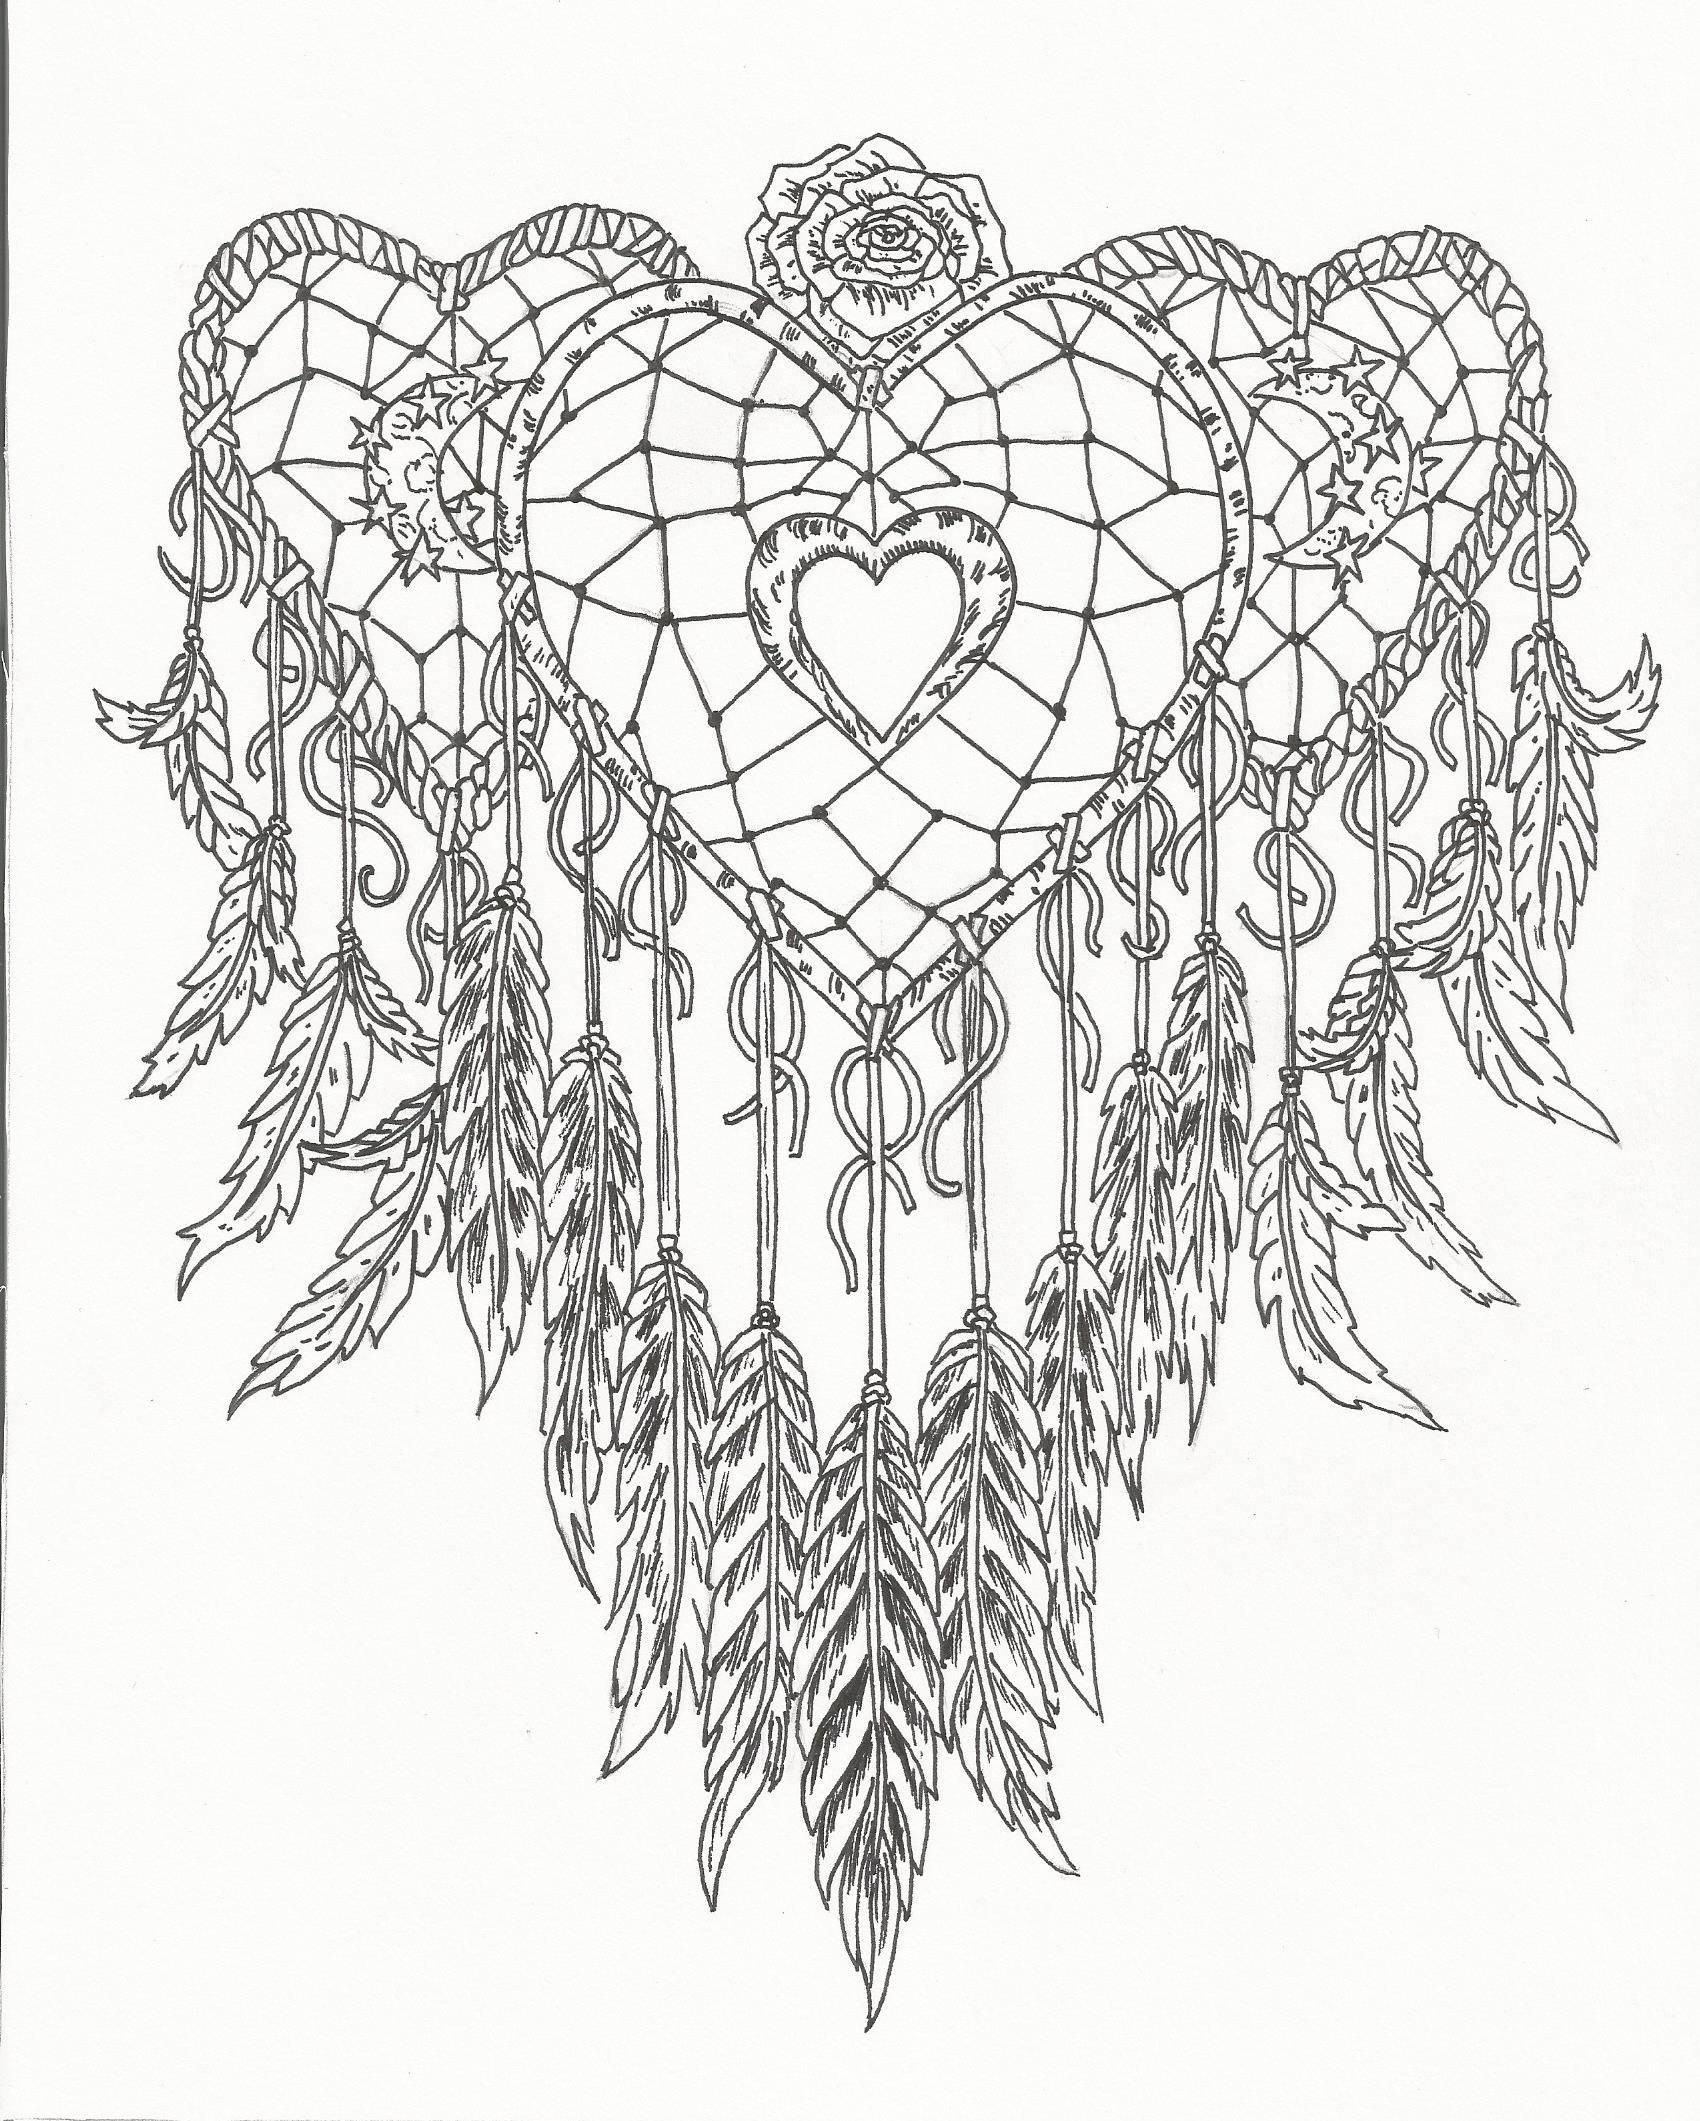 Printable Adult Coloring Pages Dream Catchers
 Heart Dream Catcher Coloring Page